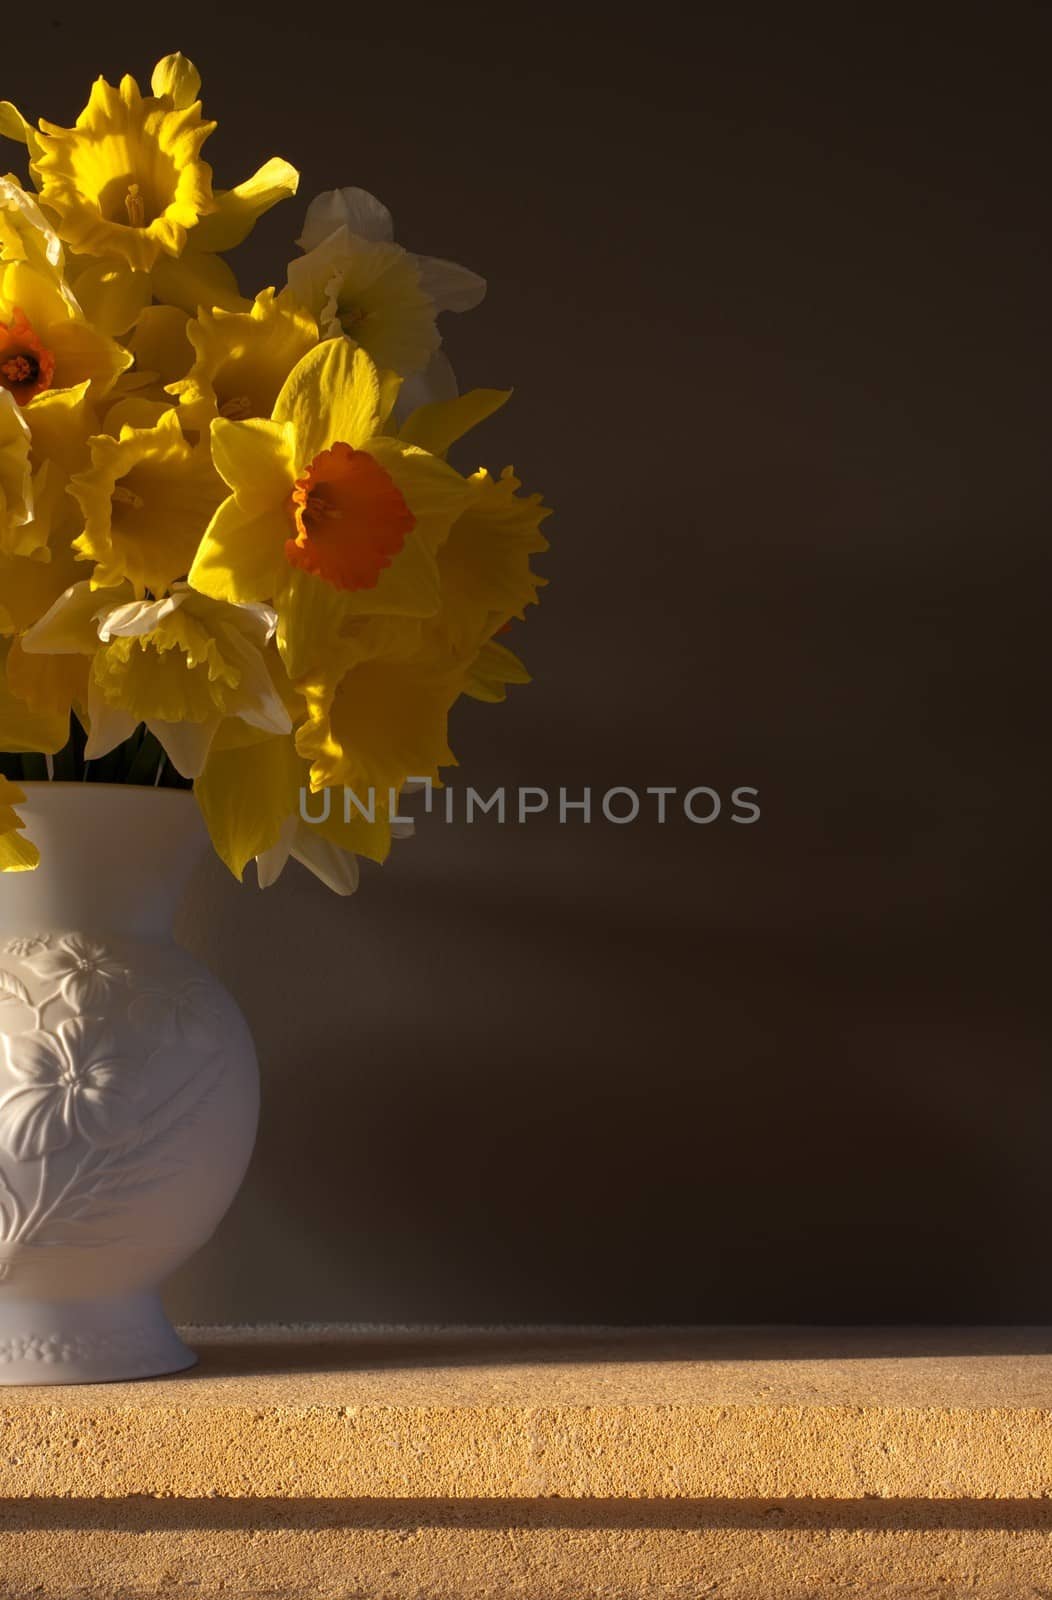 Daffodils in a white vase on a Cotswold stone mantlepiece against a plain background.